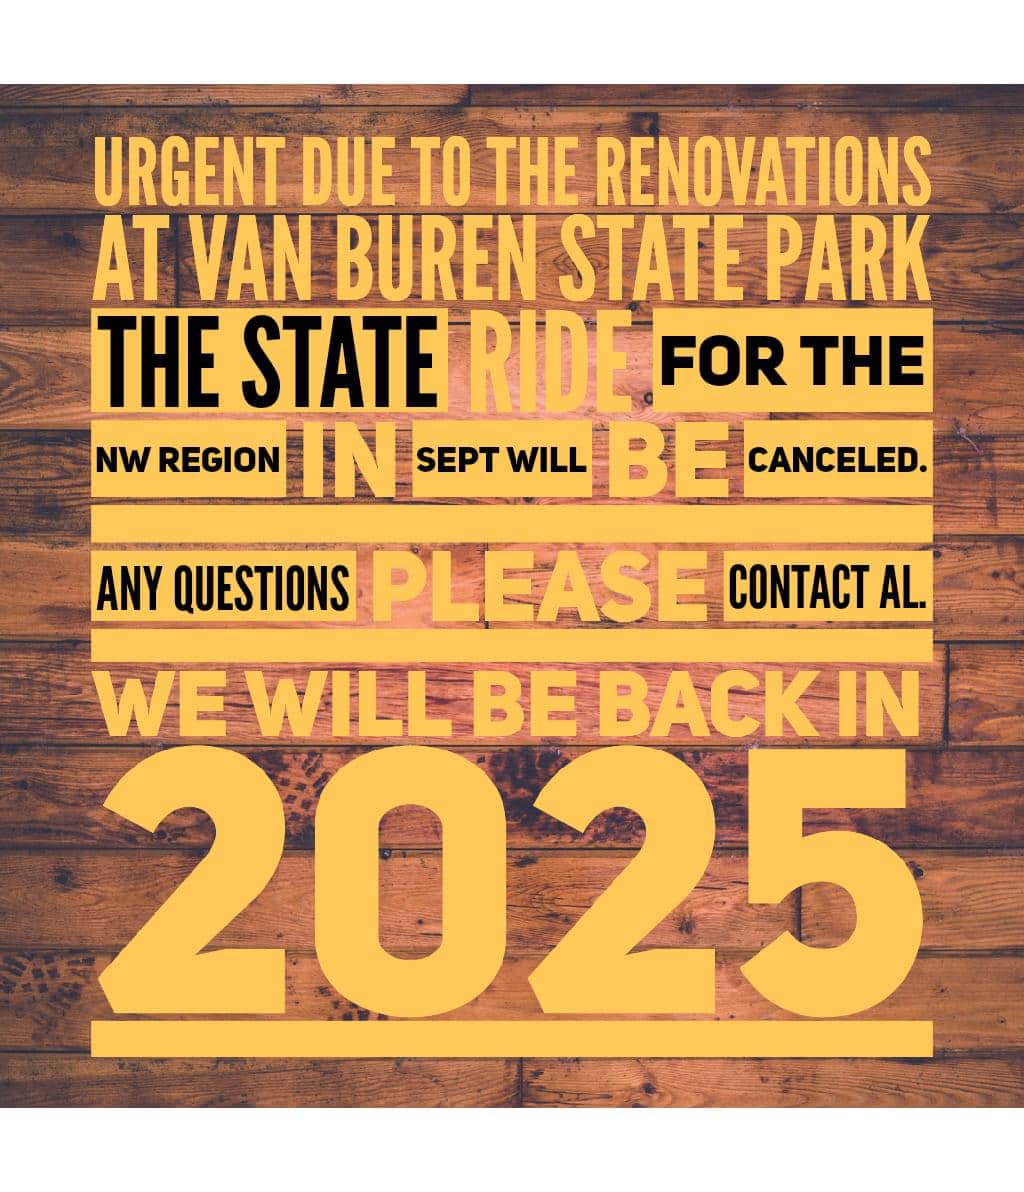 2024 NW Regional State Ride Cancelled